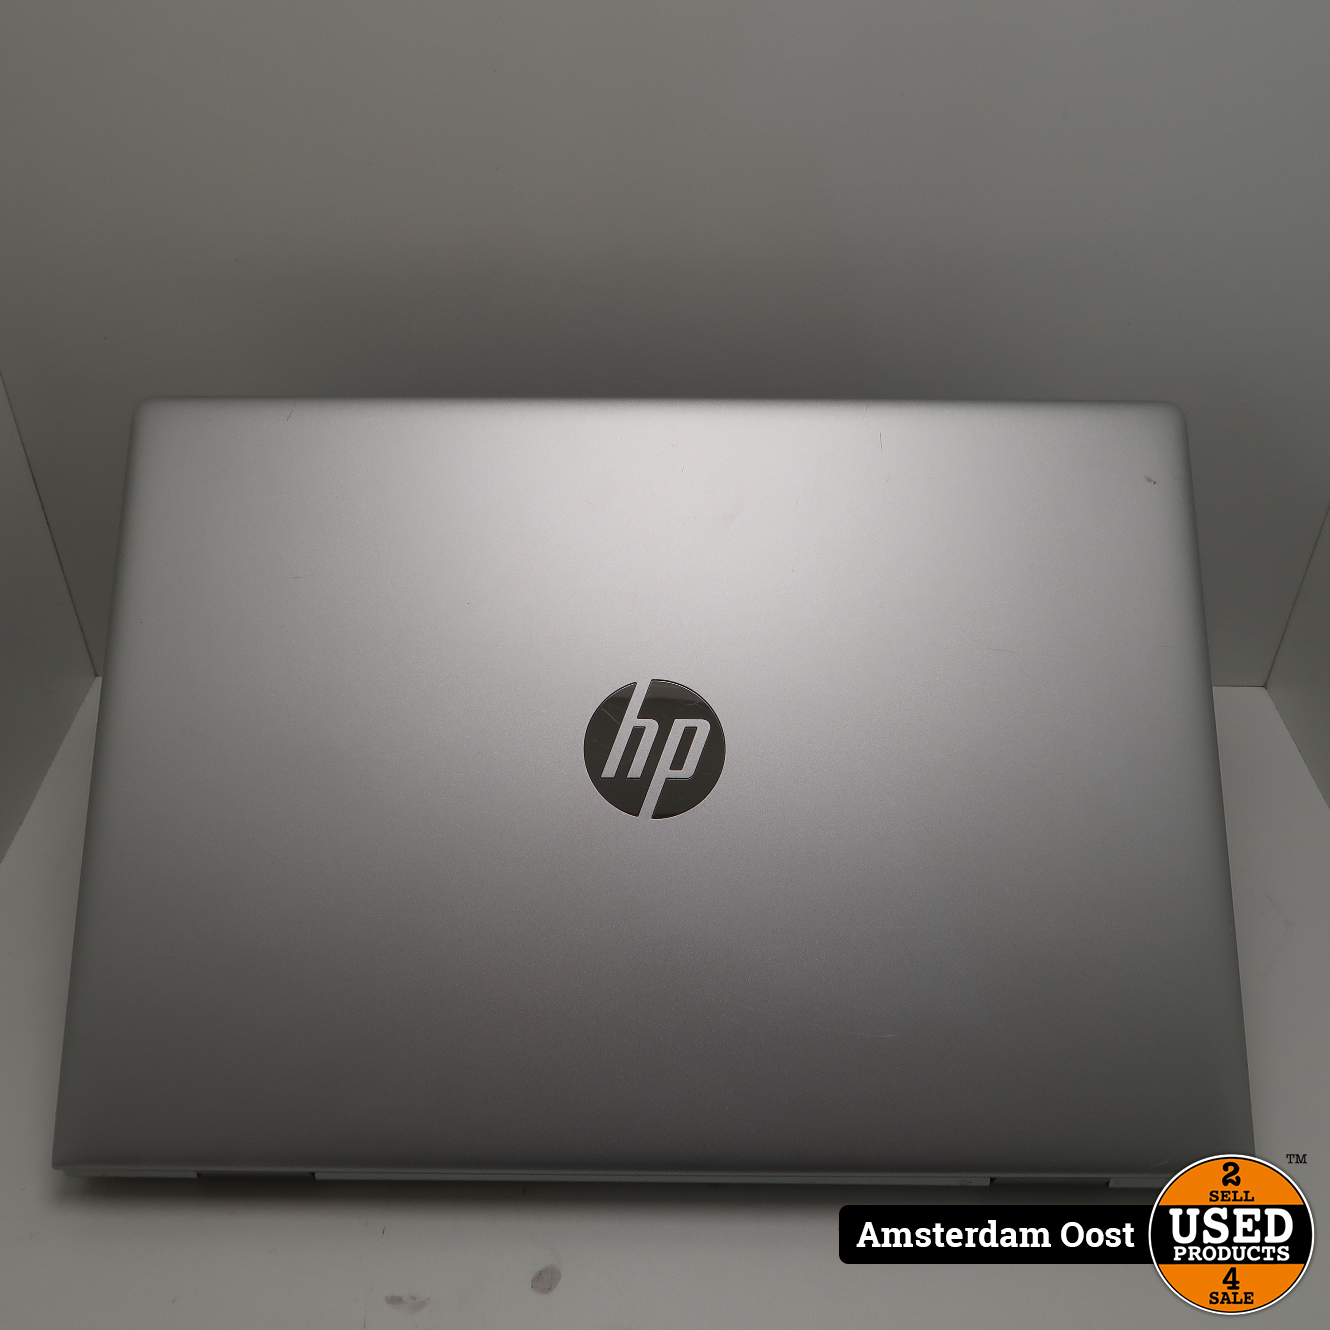 Speciaal zoogdier lezer HP Probook 640 G5 i5/8GB/256GB SSD Laptop | in Goede Staat - Used Products  Amsterdam Oost